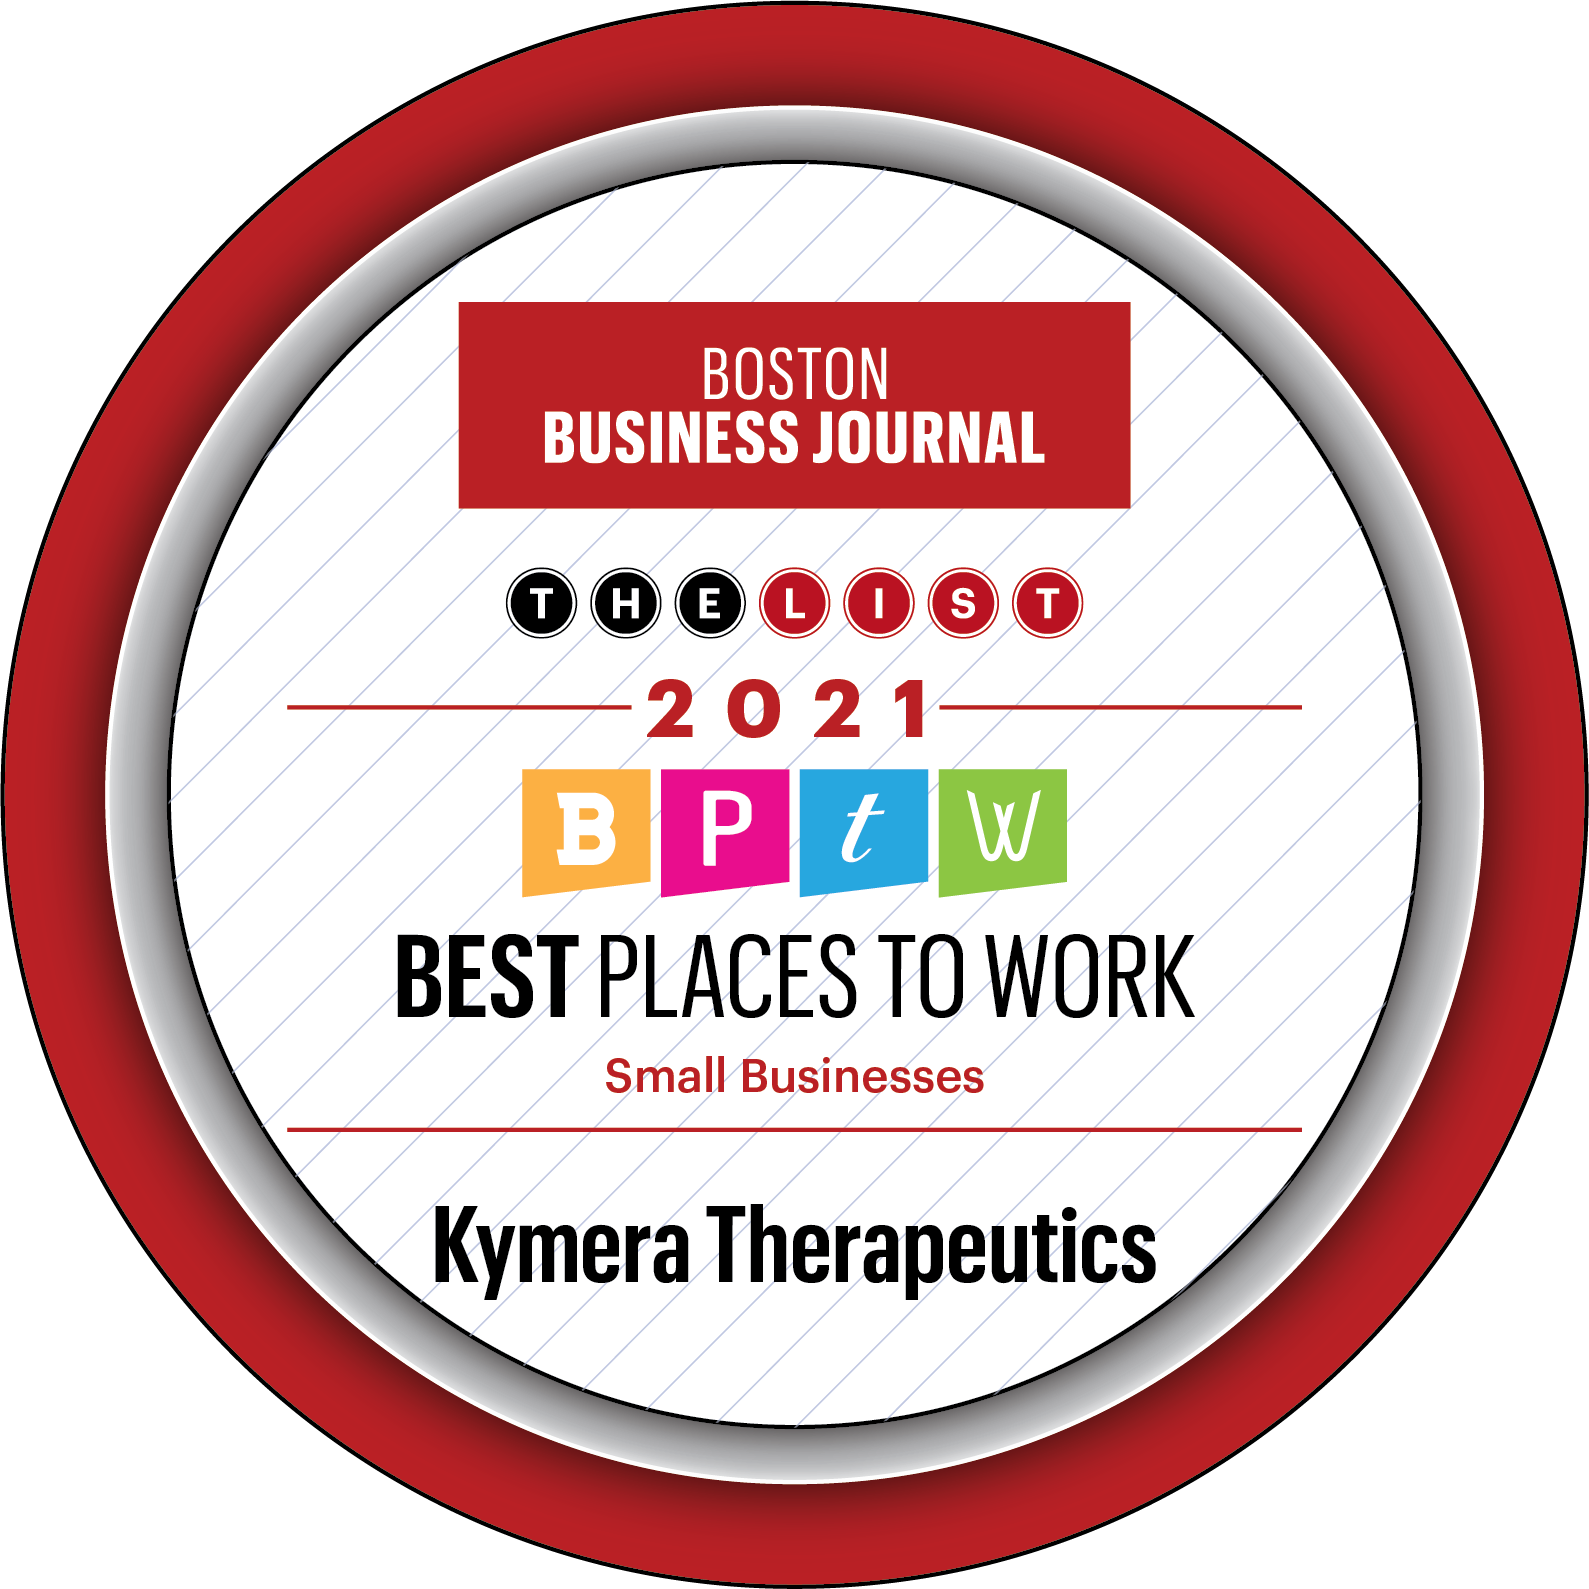 Best Places to Work Image